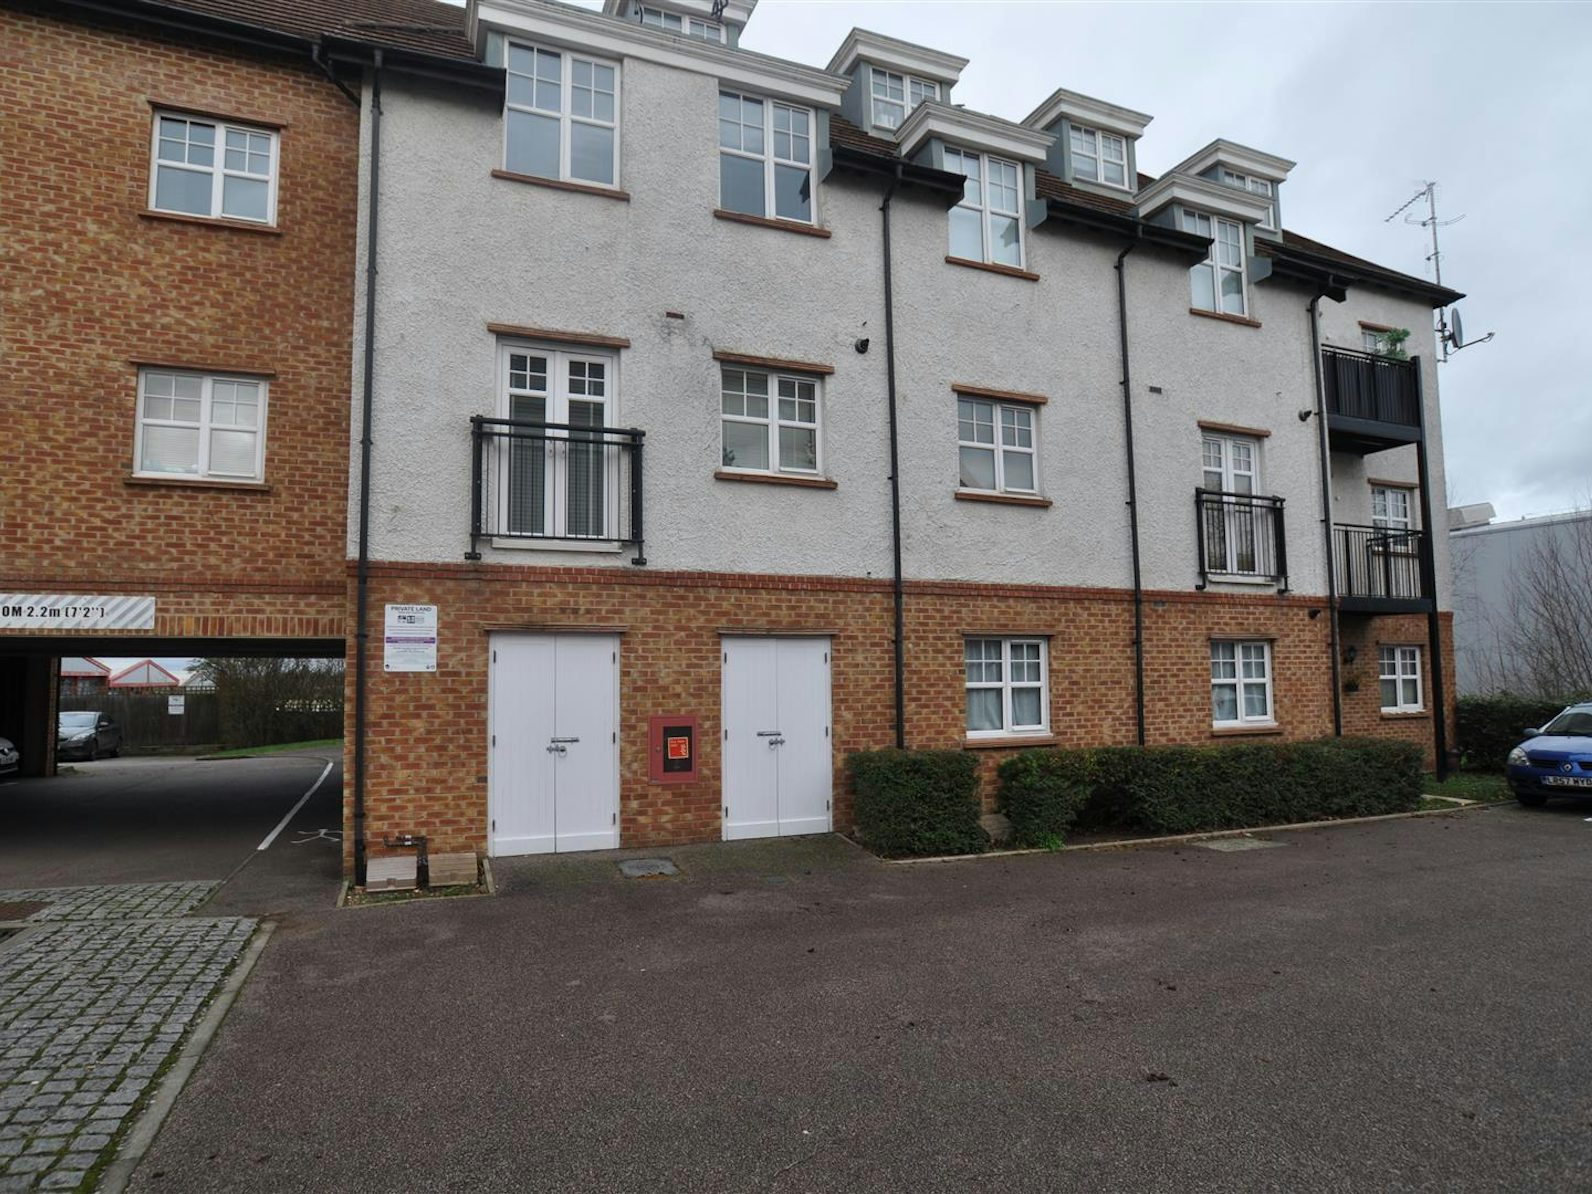 Flat for sale on Bowyer Drive Letchworth Garden City, SG6